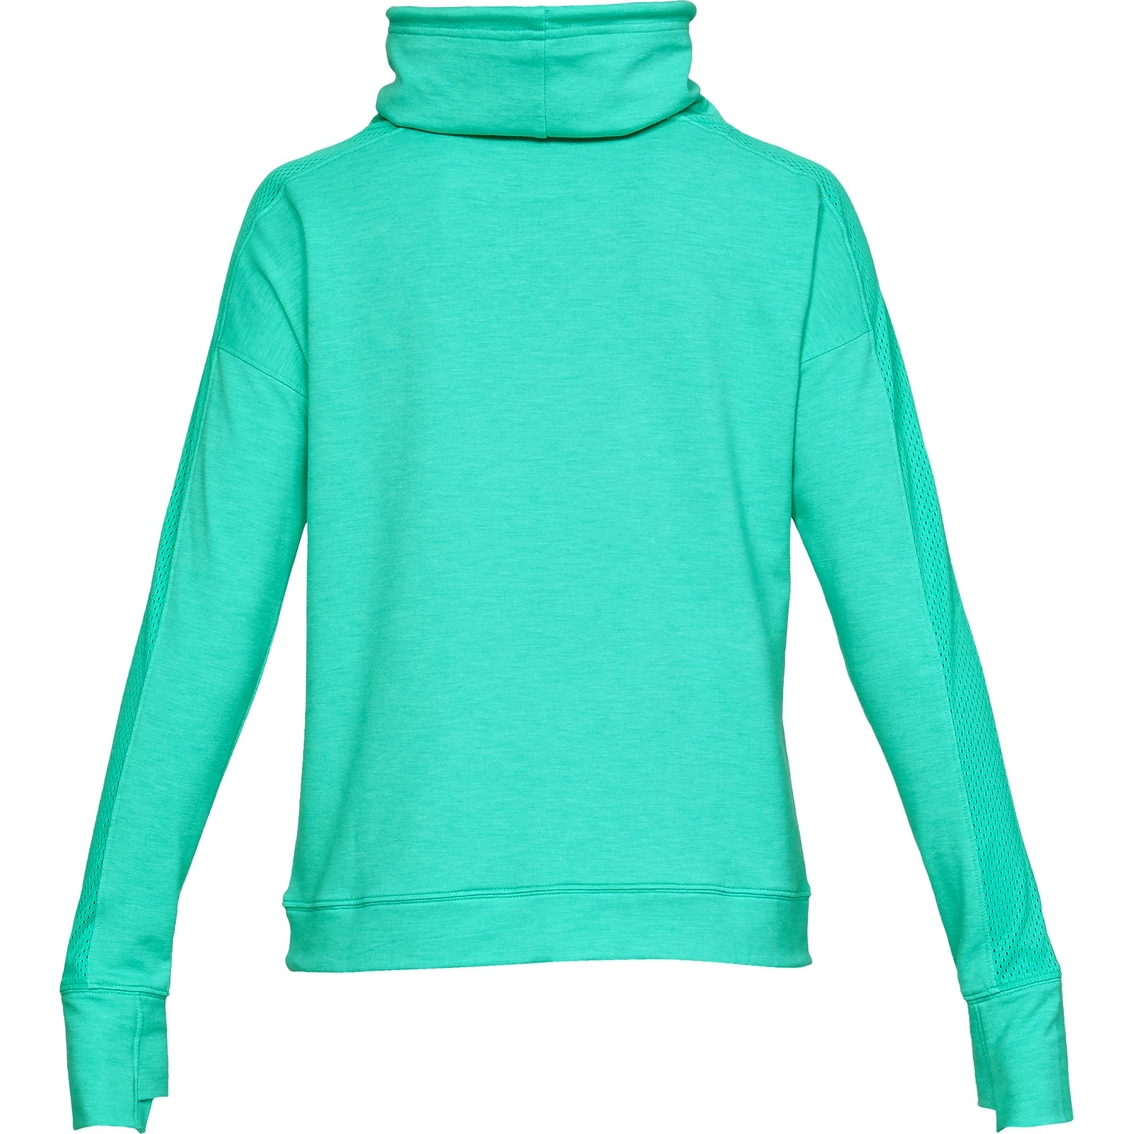 Under Armour Featherweight Funnel Neck Fleece - Image 5 of 5